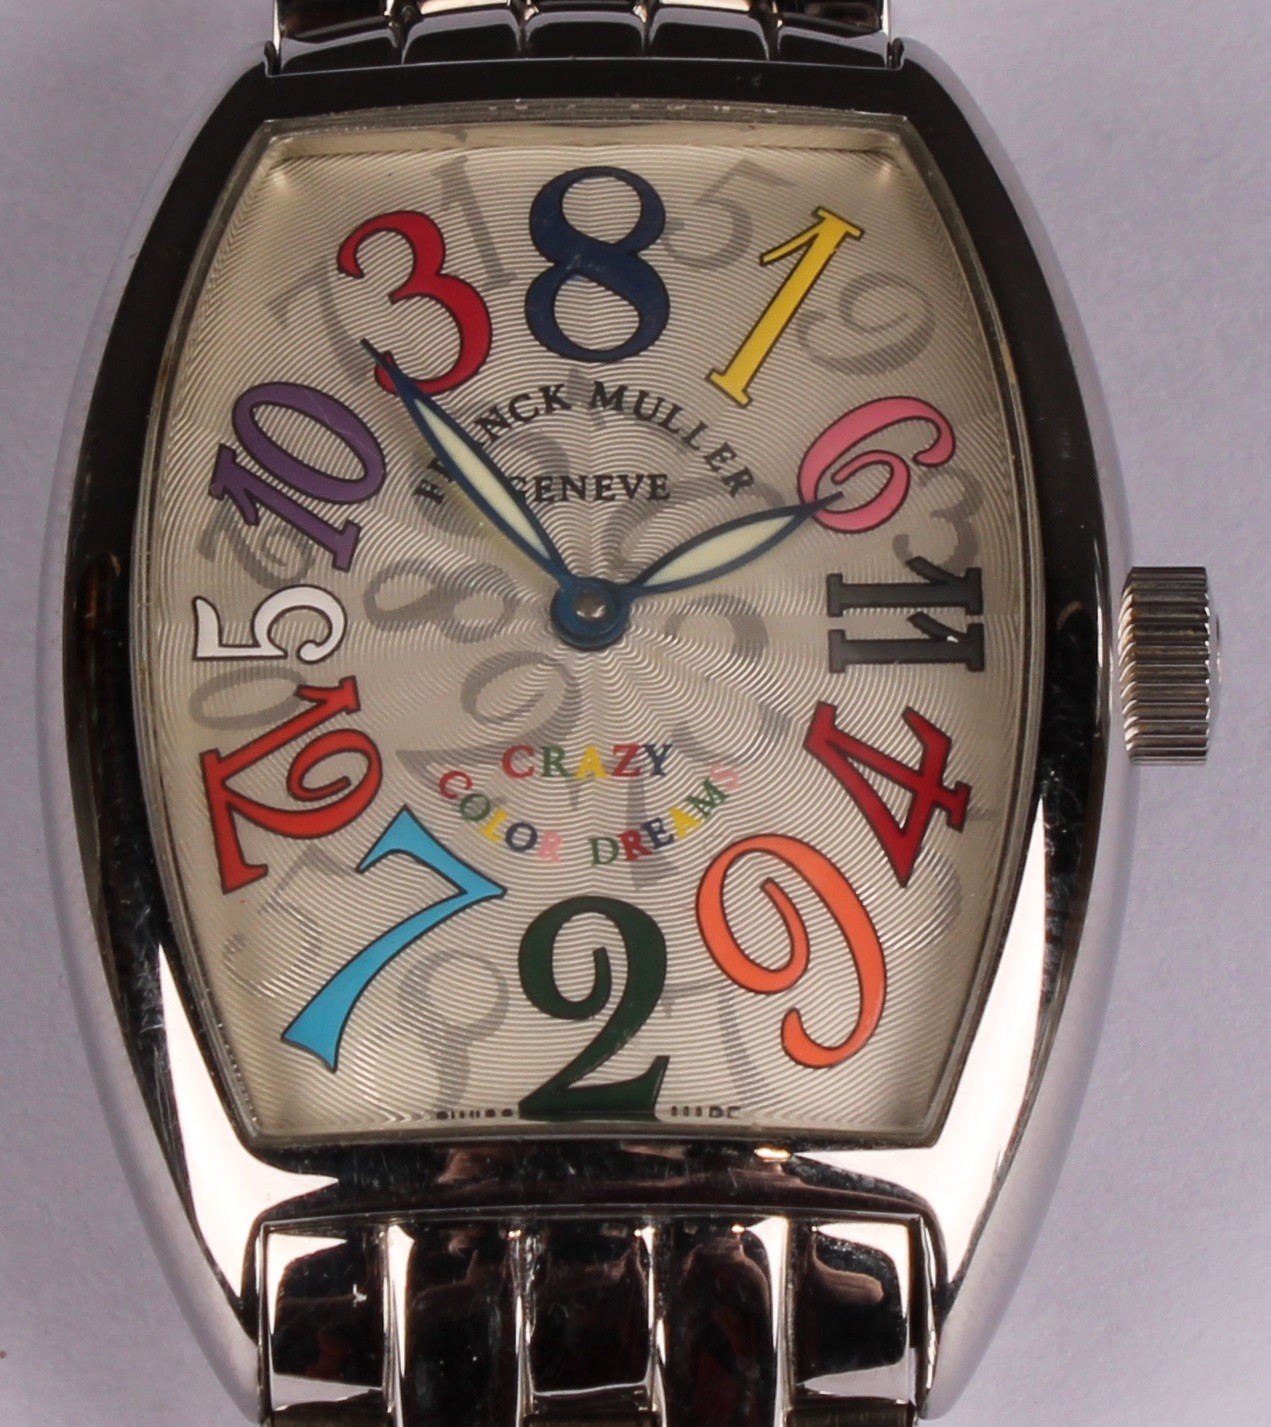 ***LOT WITHDRAWN ***A Franck Muller of Geneve stainless steel watch, Crazy Color Dreams (sic.), - Image 3 of 6